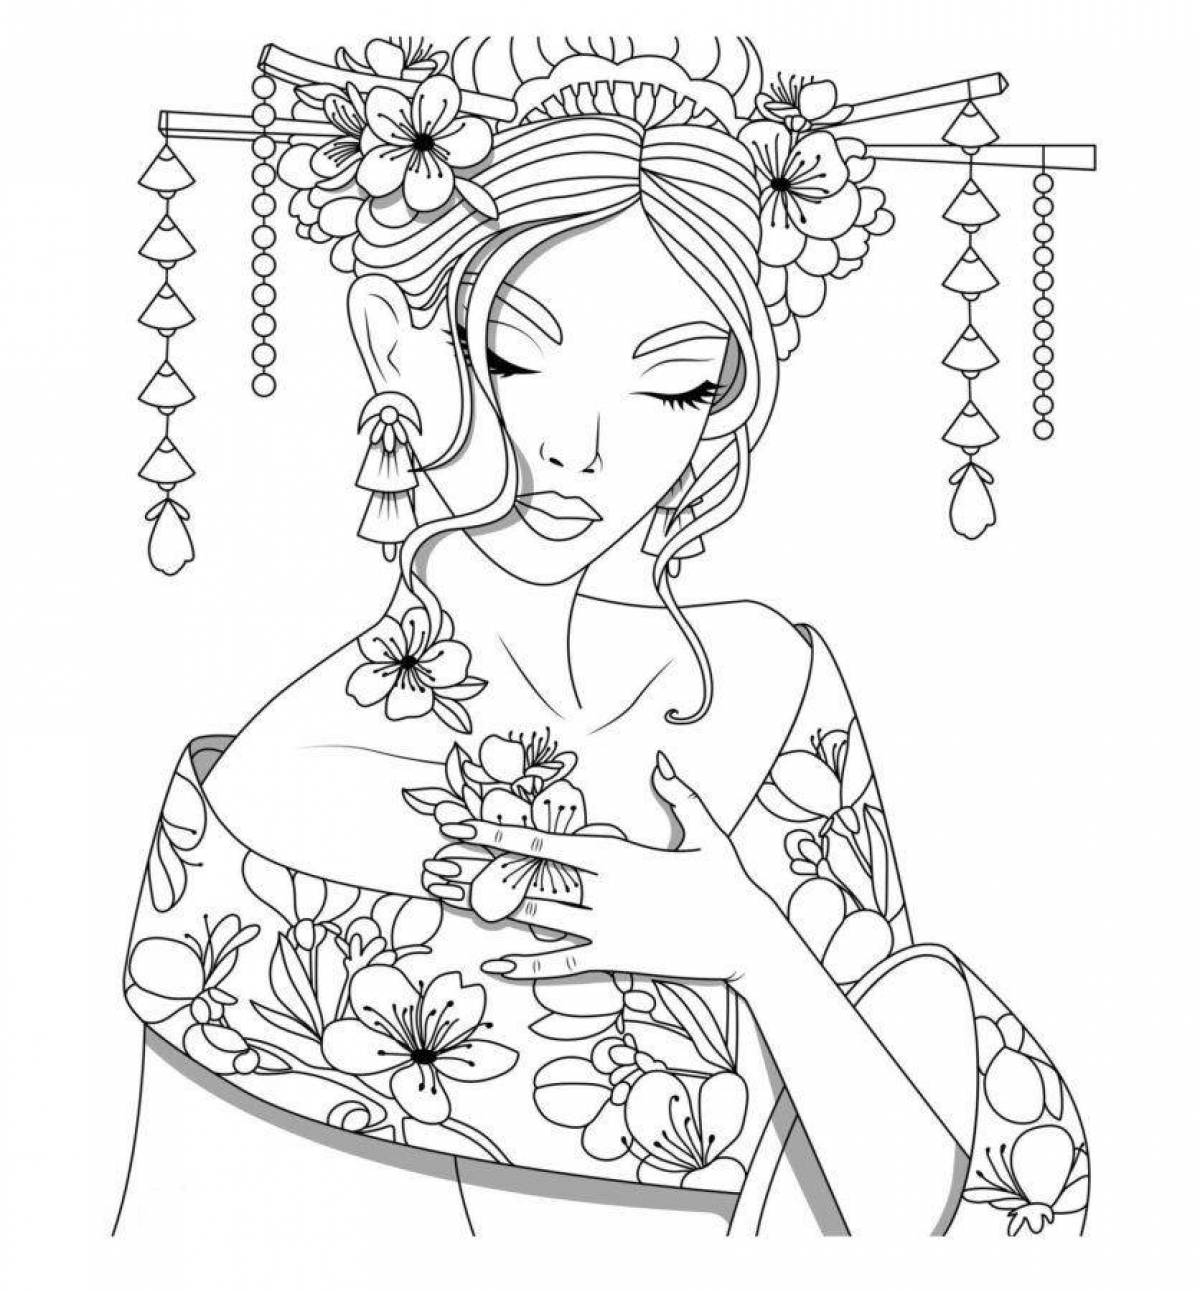 Chinese live girls coloring pages